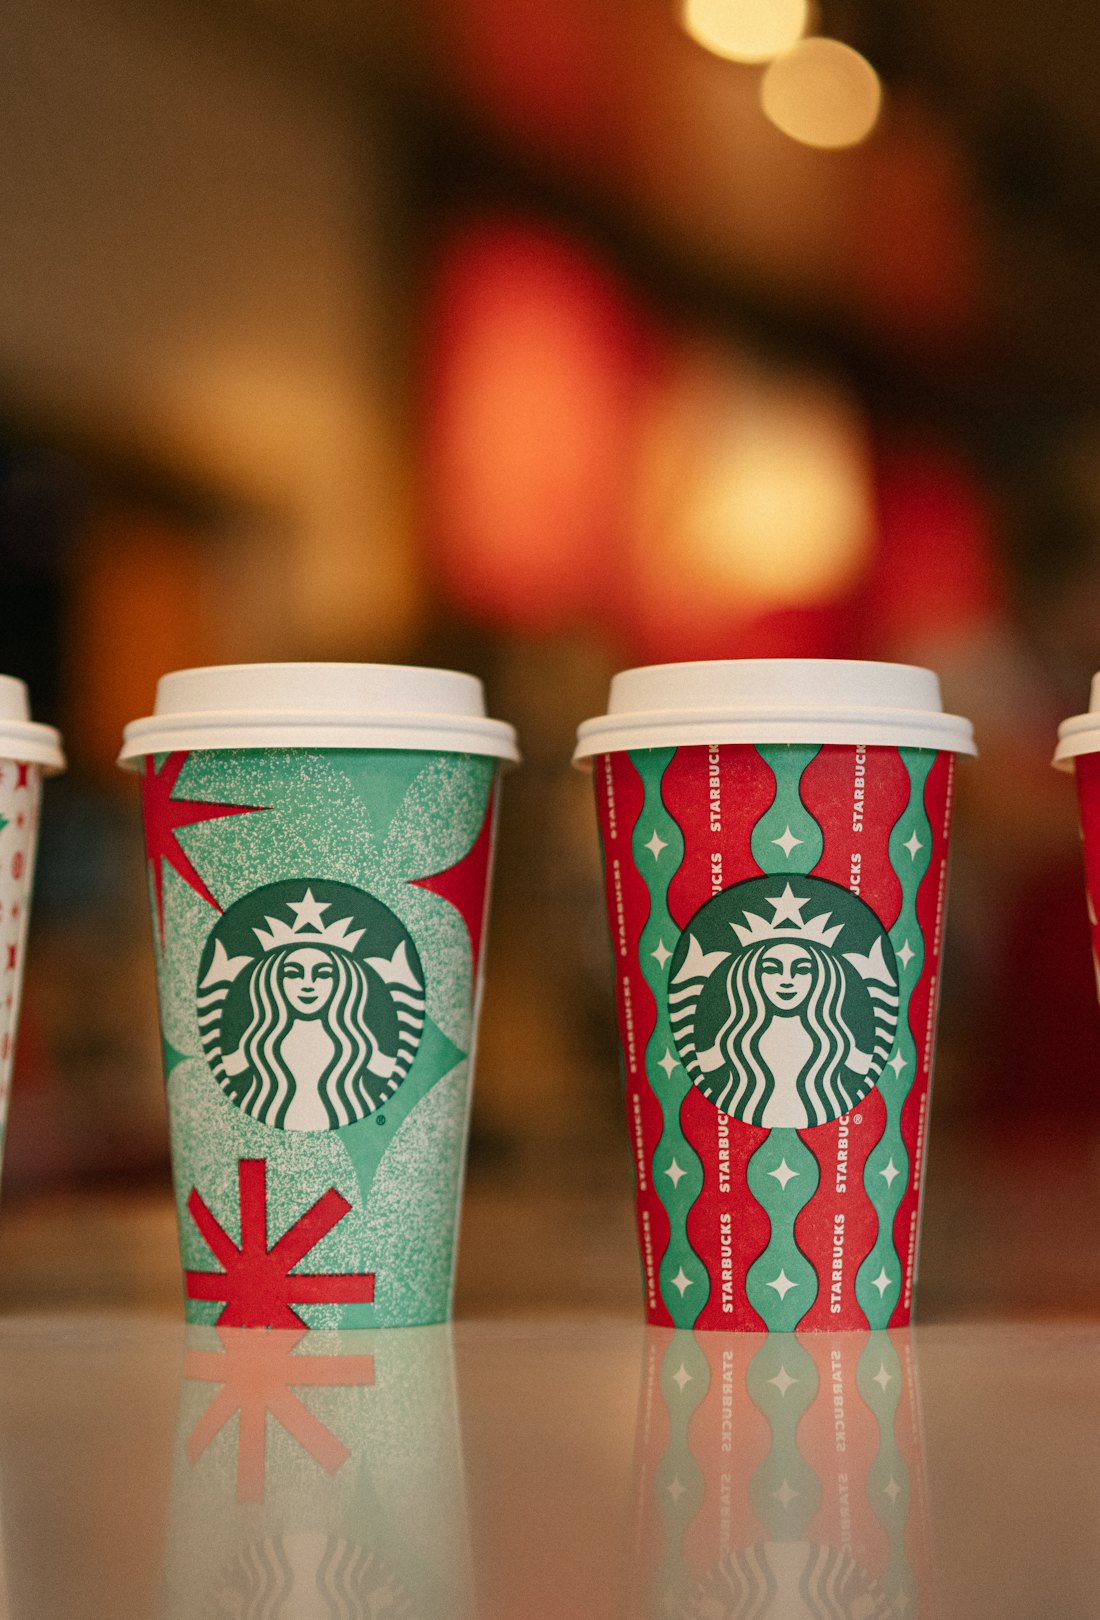 The Starbucks holiday drink menu will come served in four new red cups for the holidays.